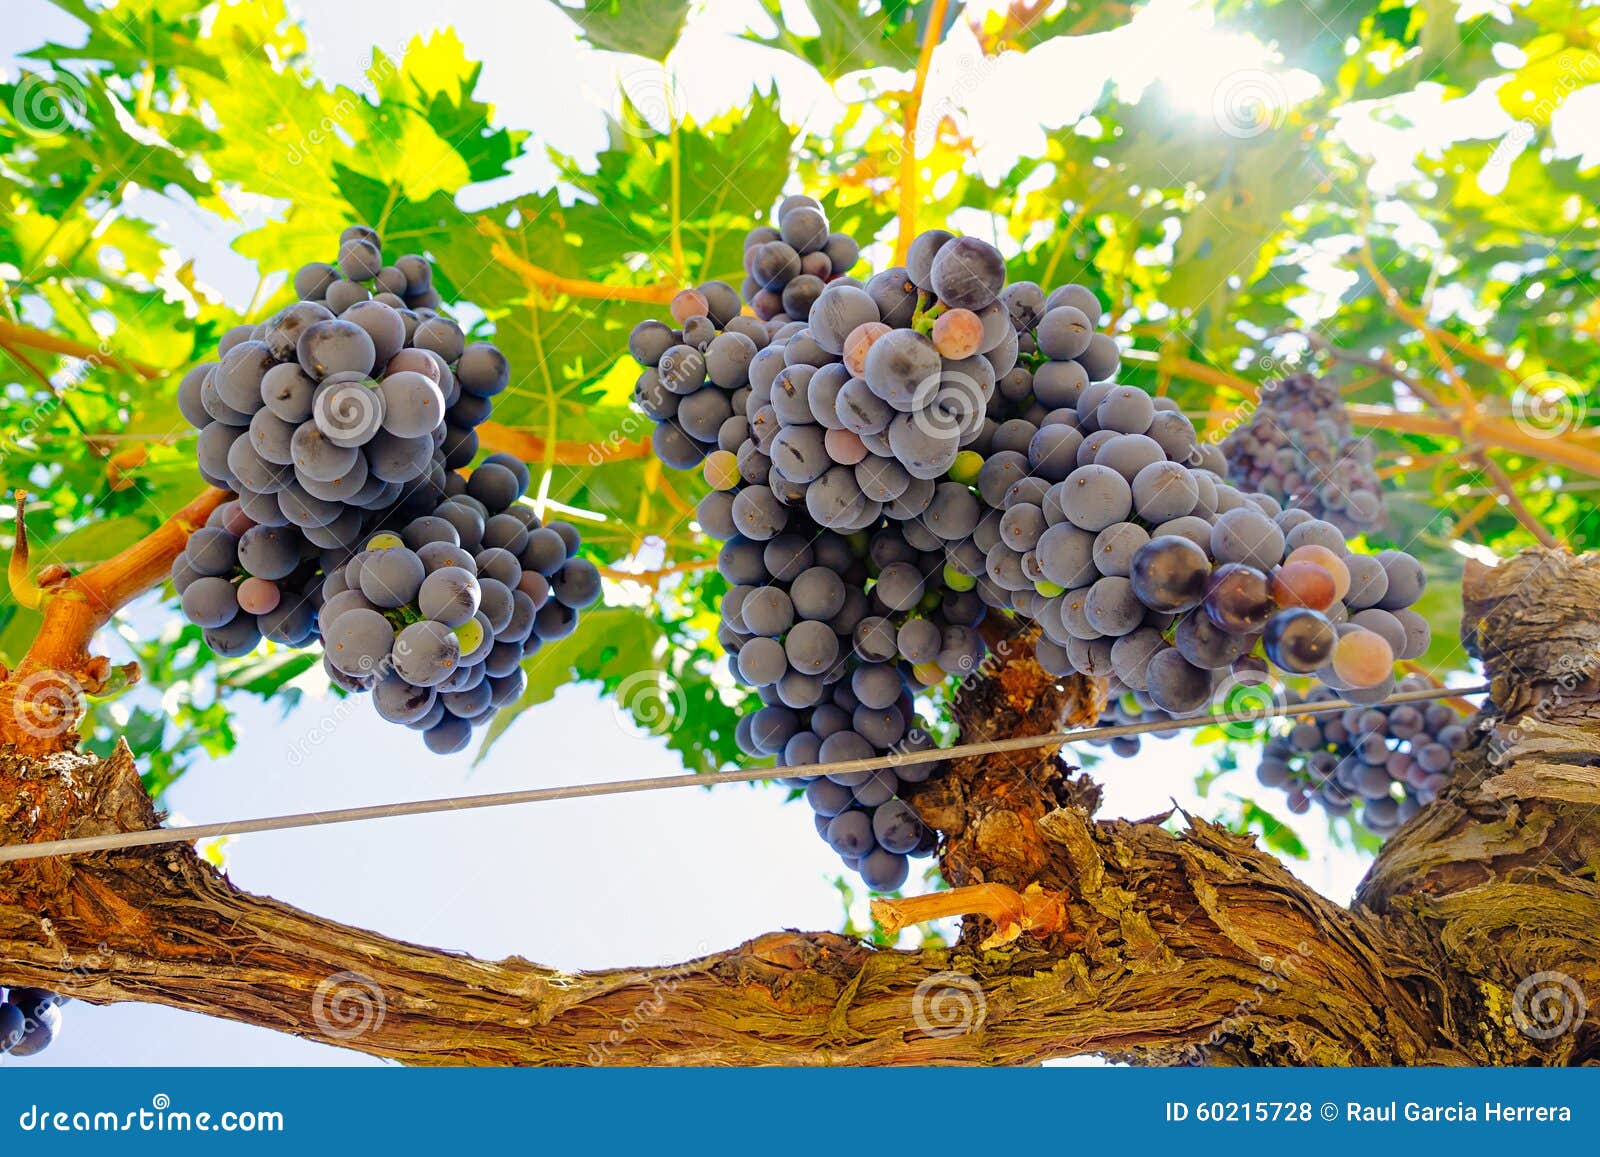 red grapes on the vine. tinta de toro grape. view from below